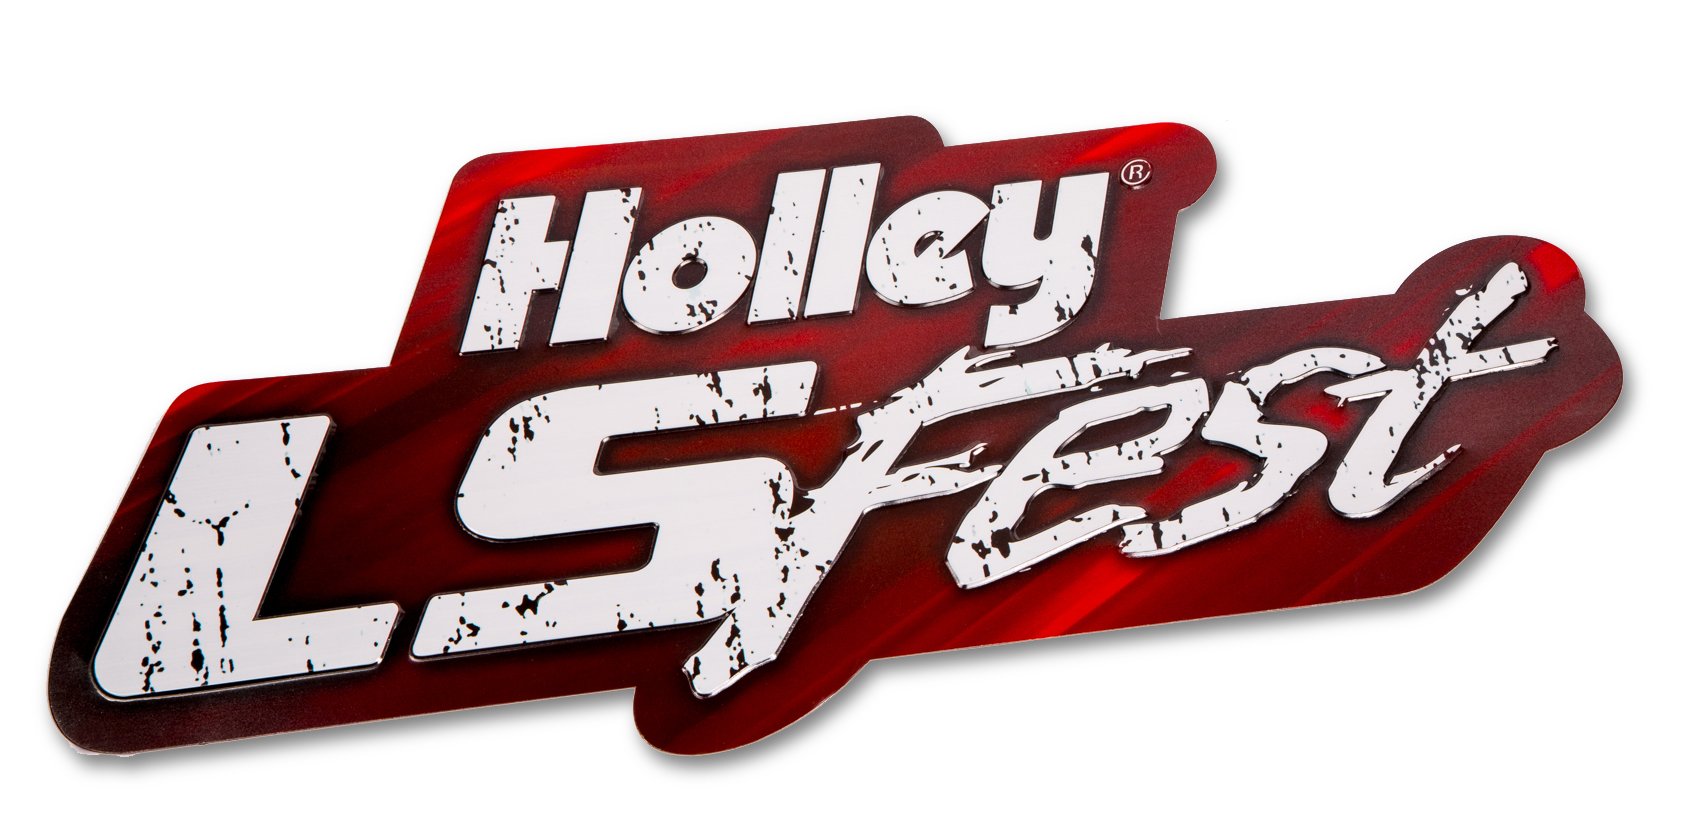 HOLLEY LS FEST METAL TIN SIGN 10133HOL